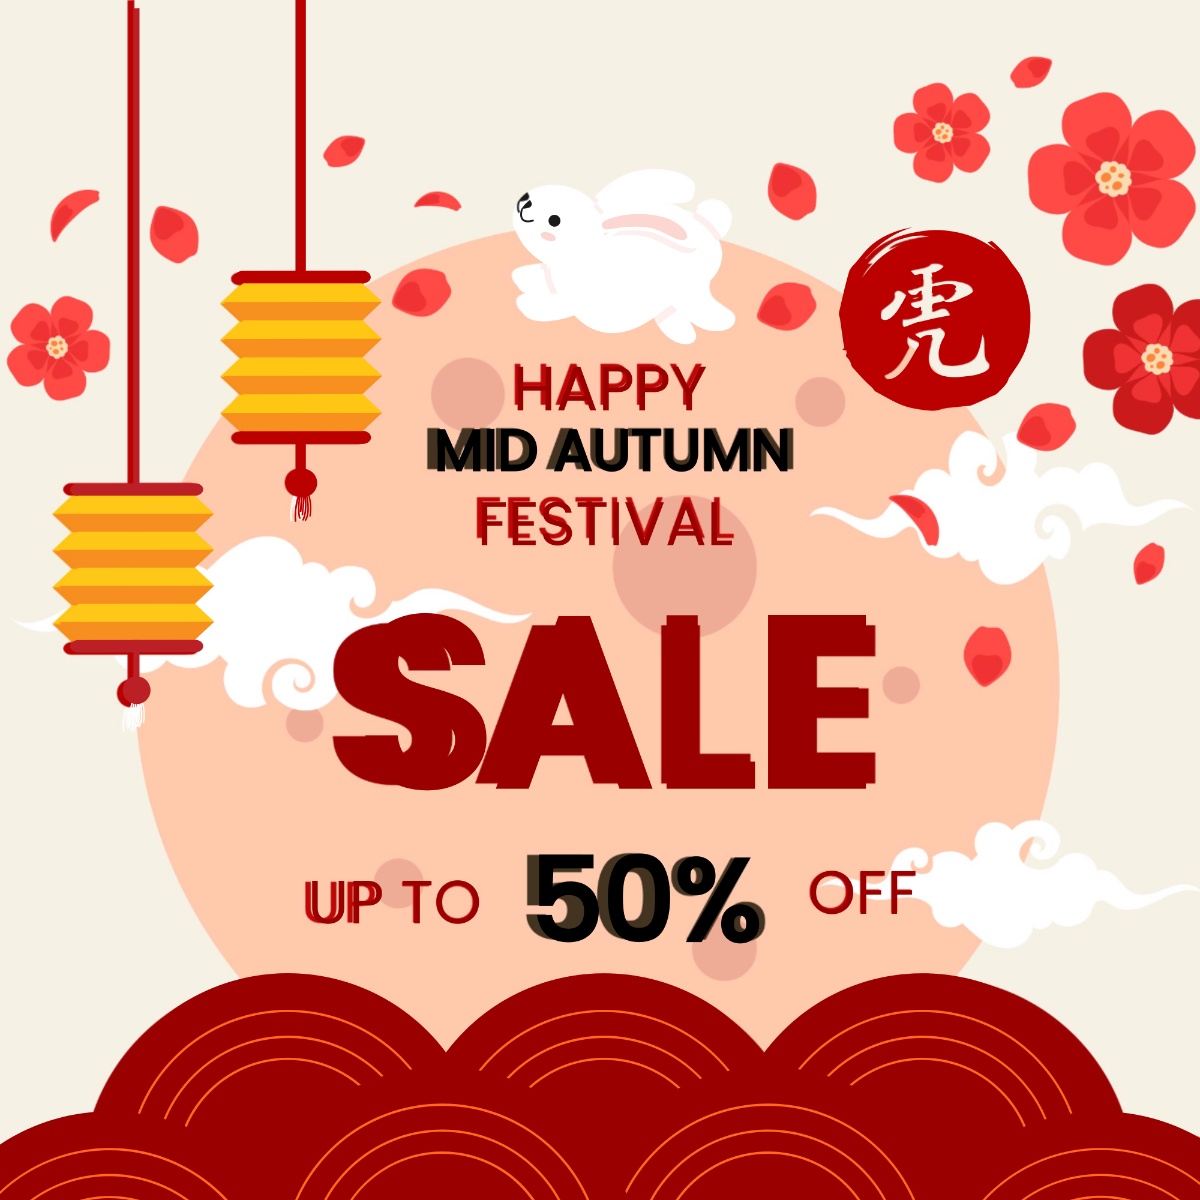 Free Mid-Autumn Festival Promotion Vector Template